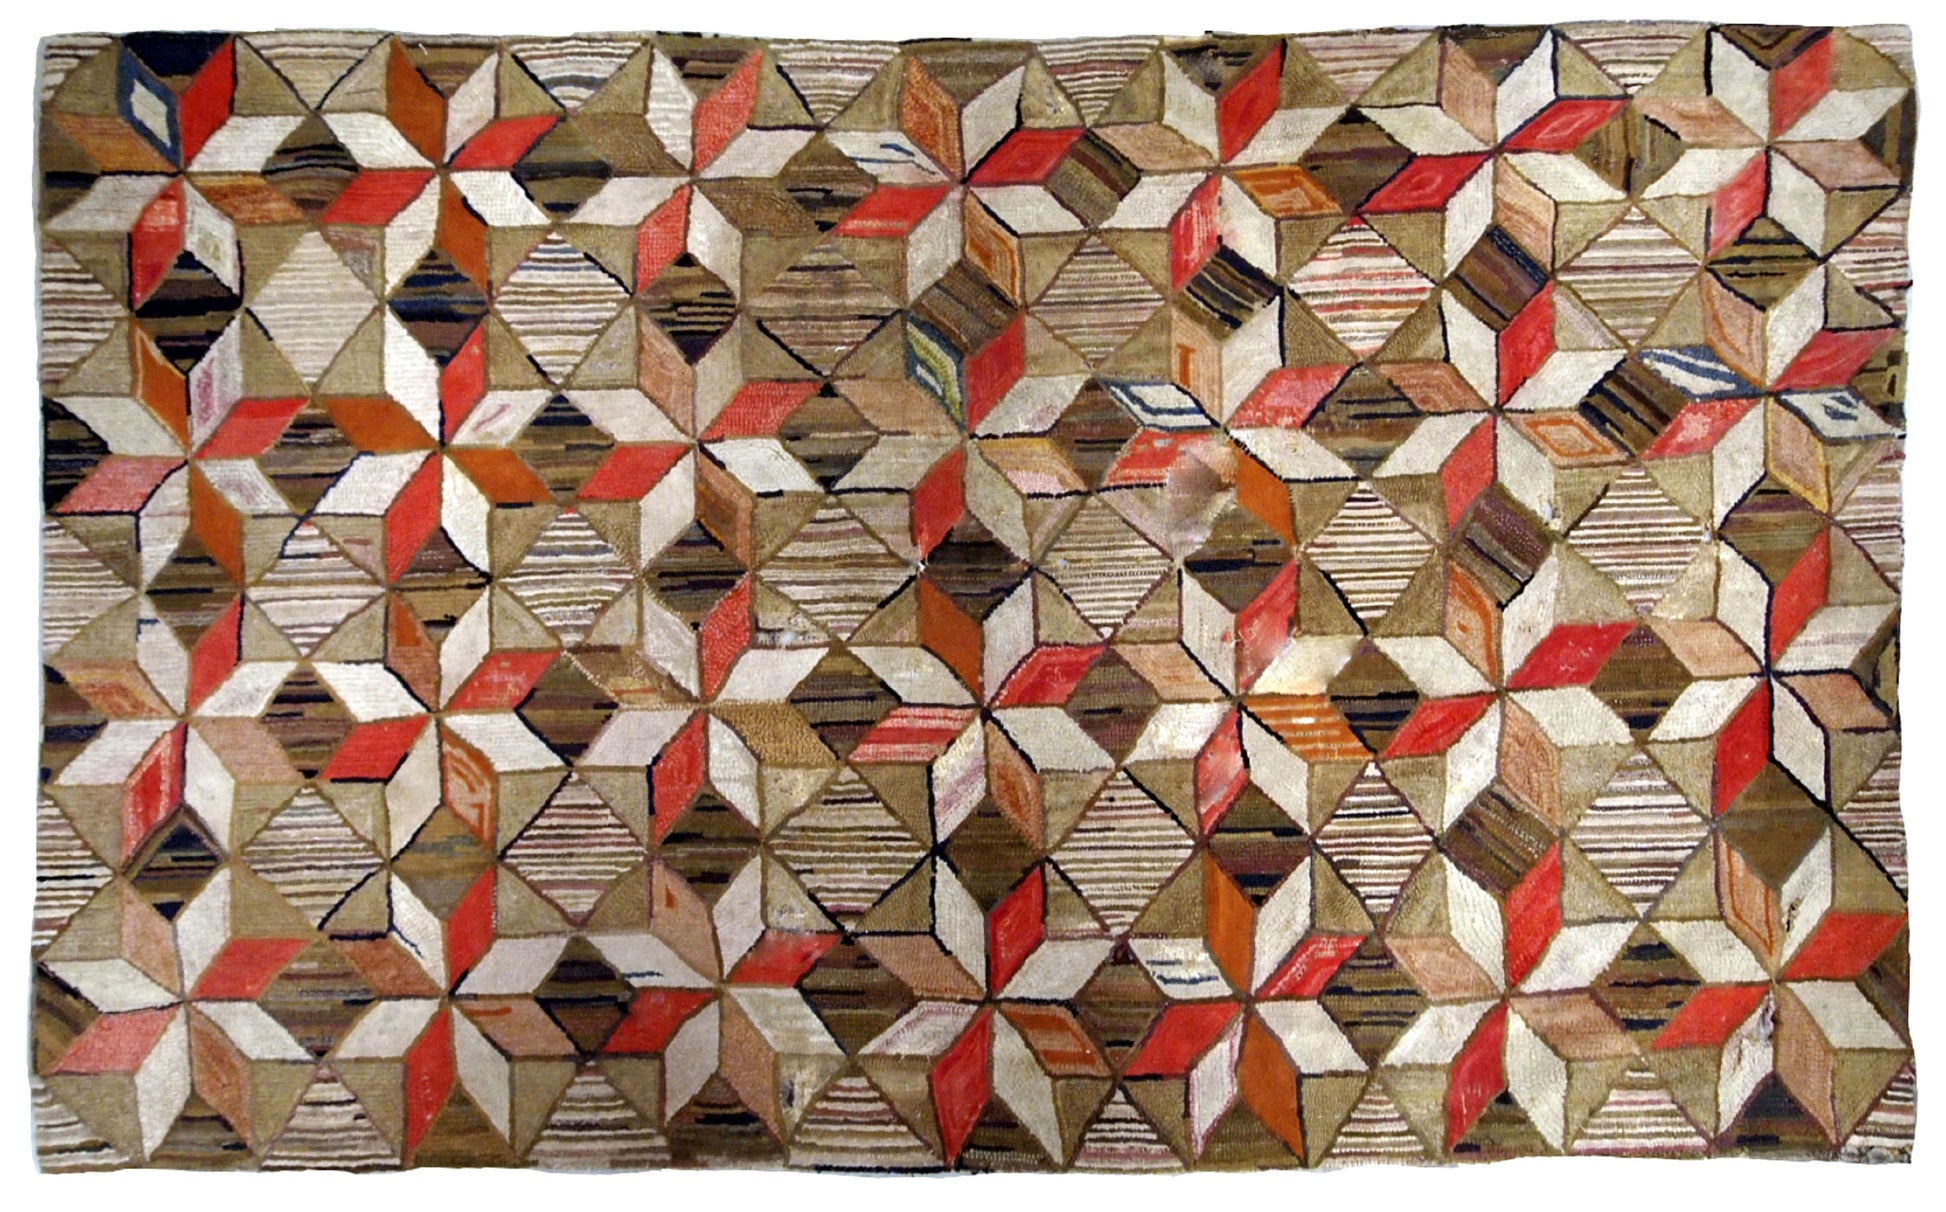 Antique handmade geometric American Hooked rug in brown, red, beige and olive shades. The rug has several holes, they has been restored, it is in good condition now.